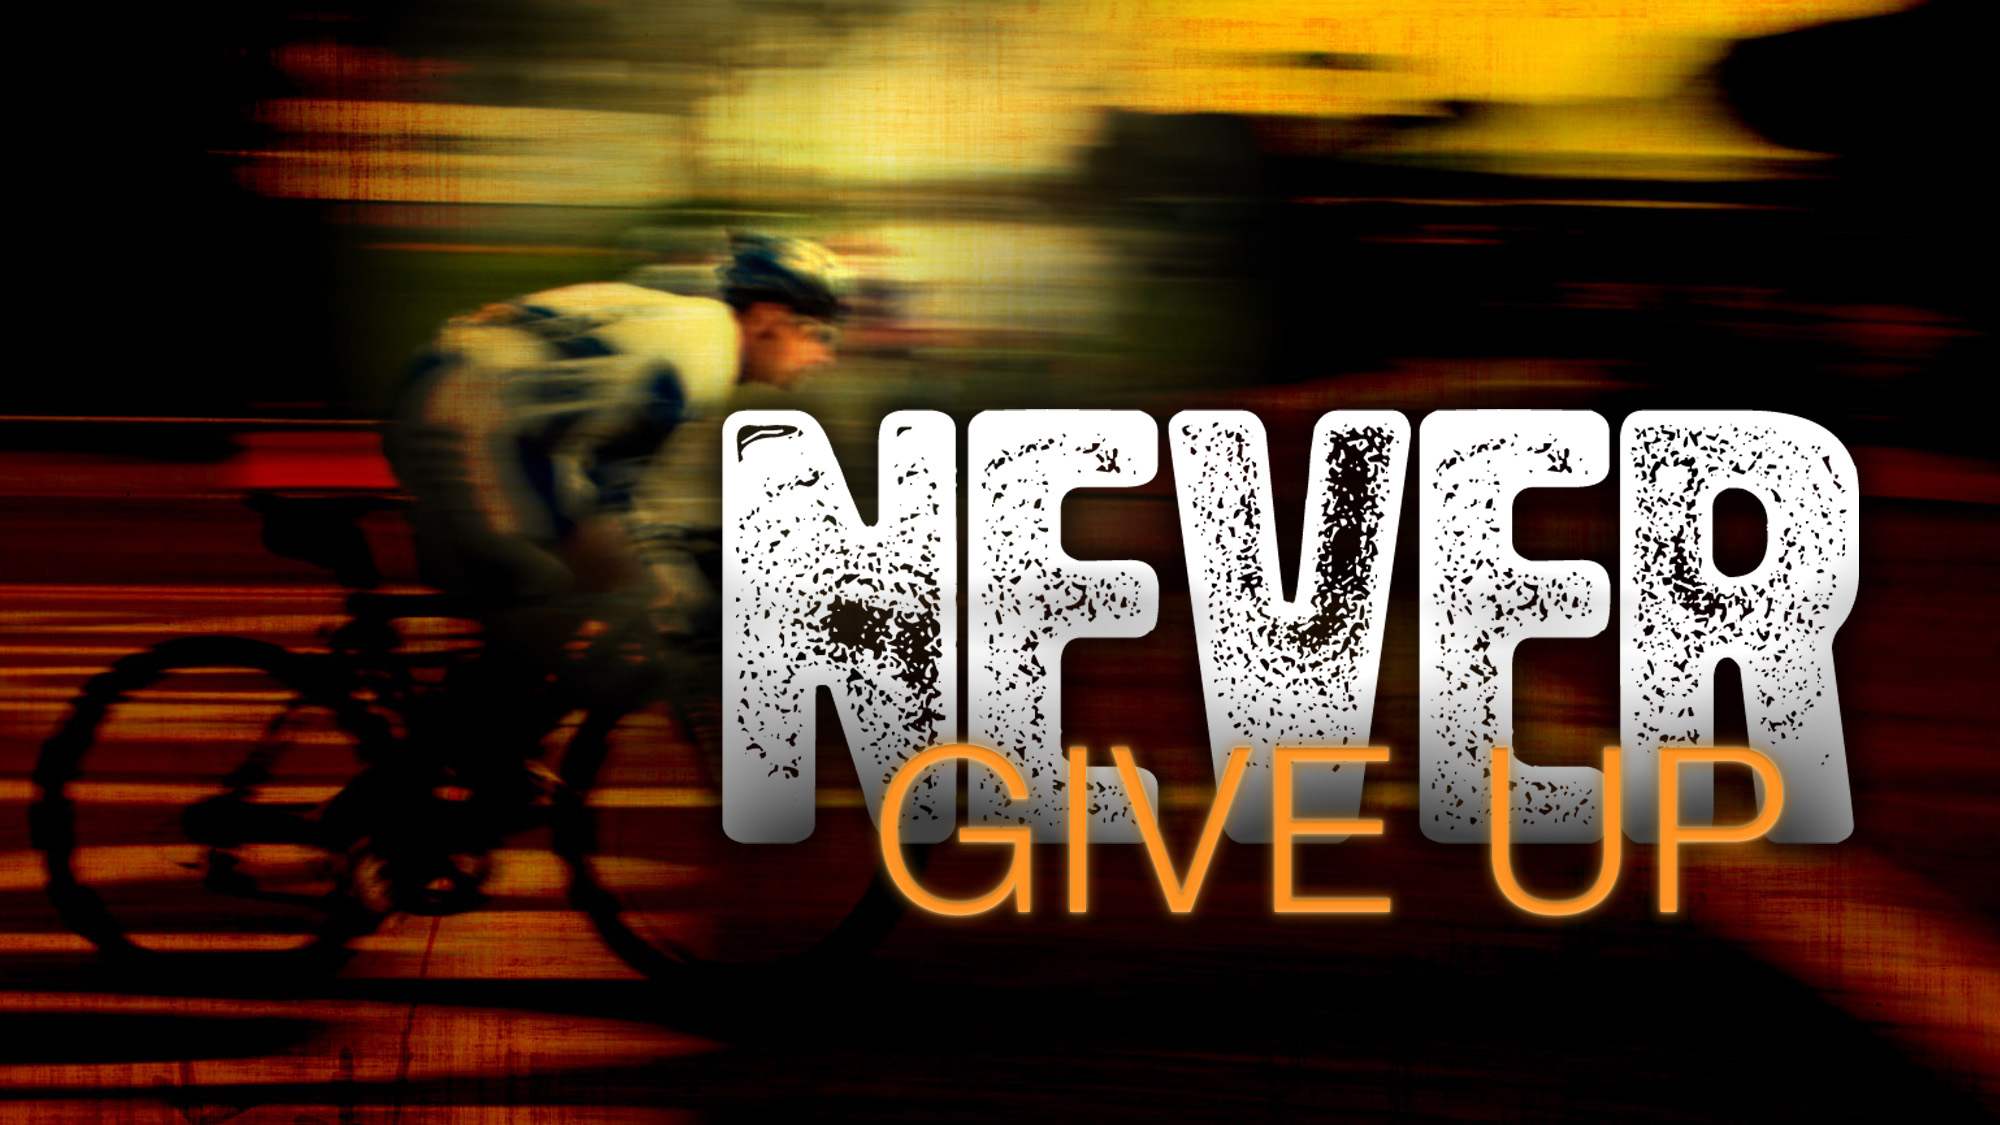 never give up 4